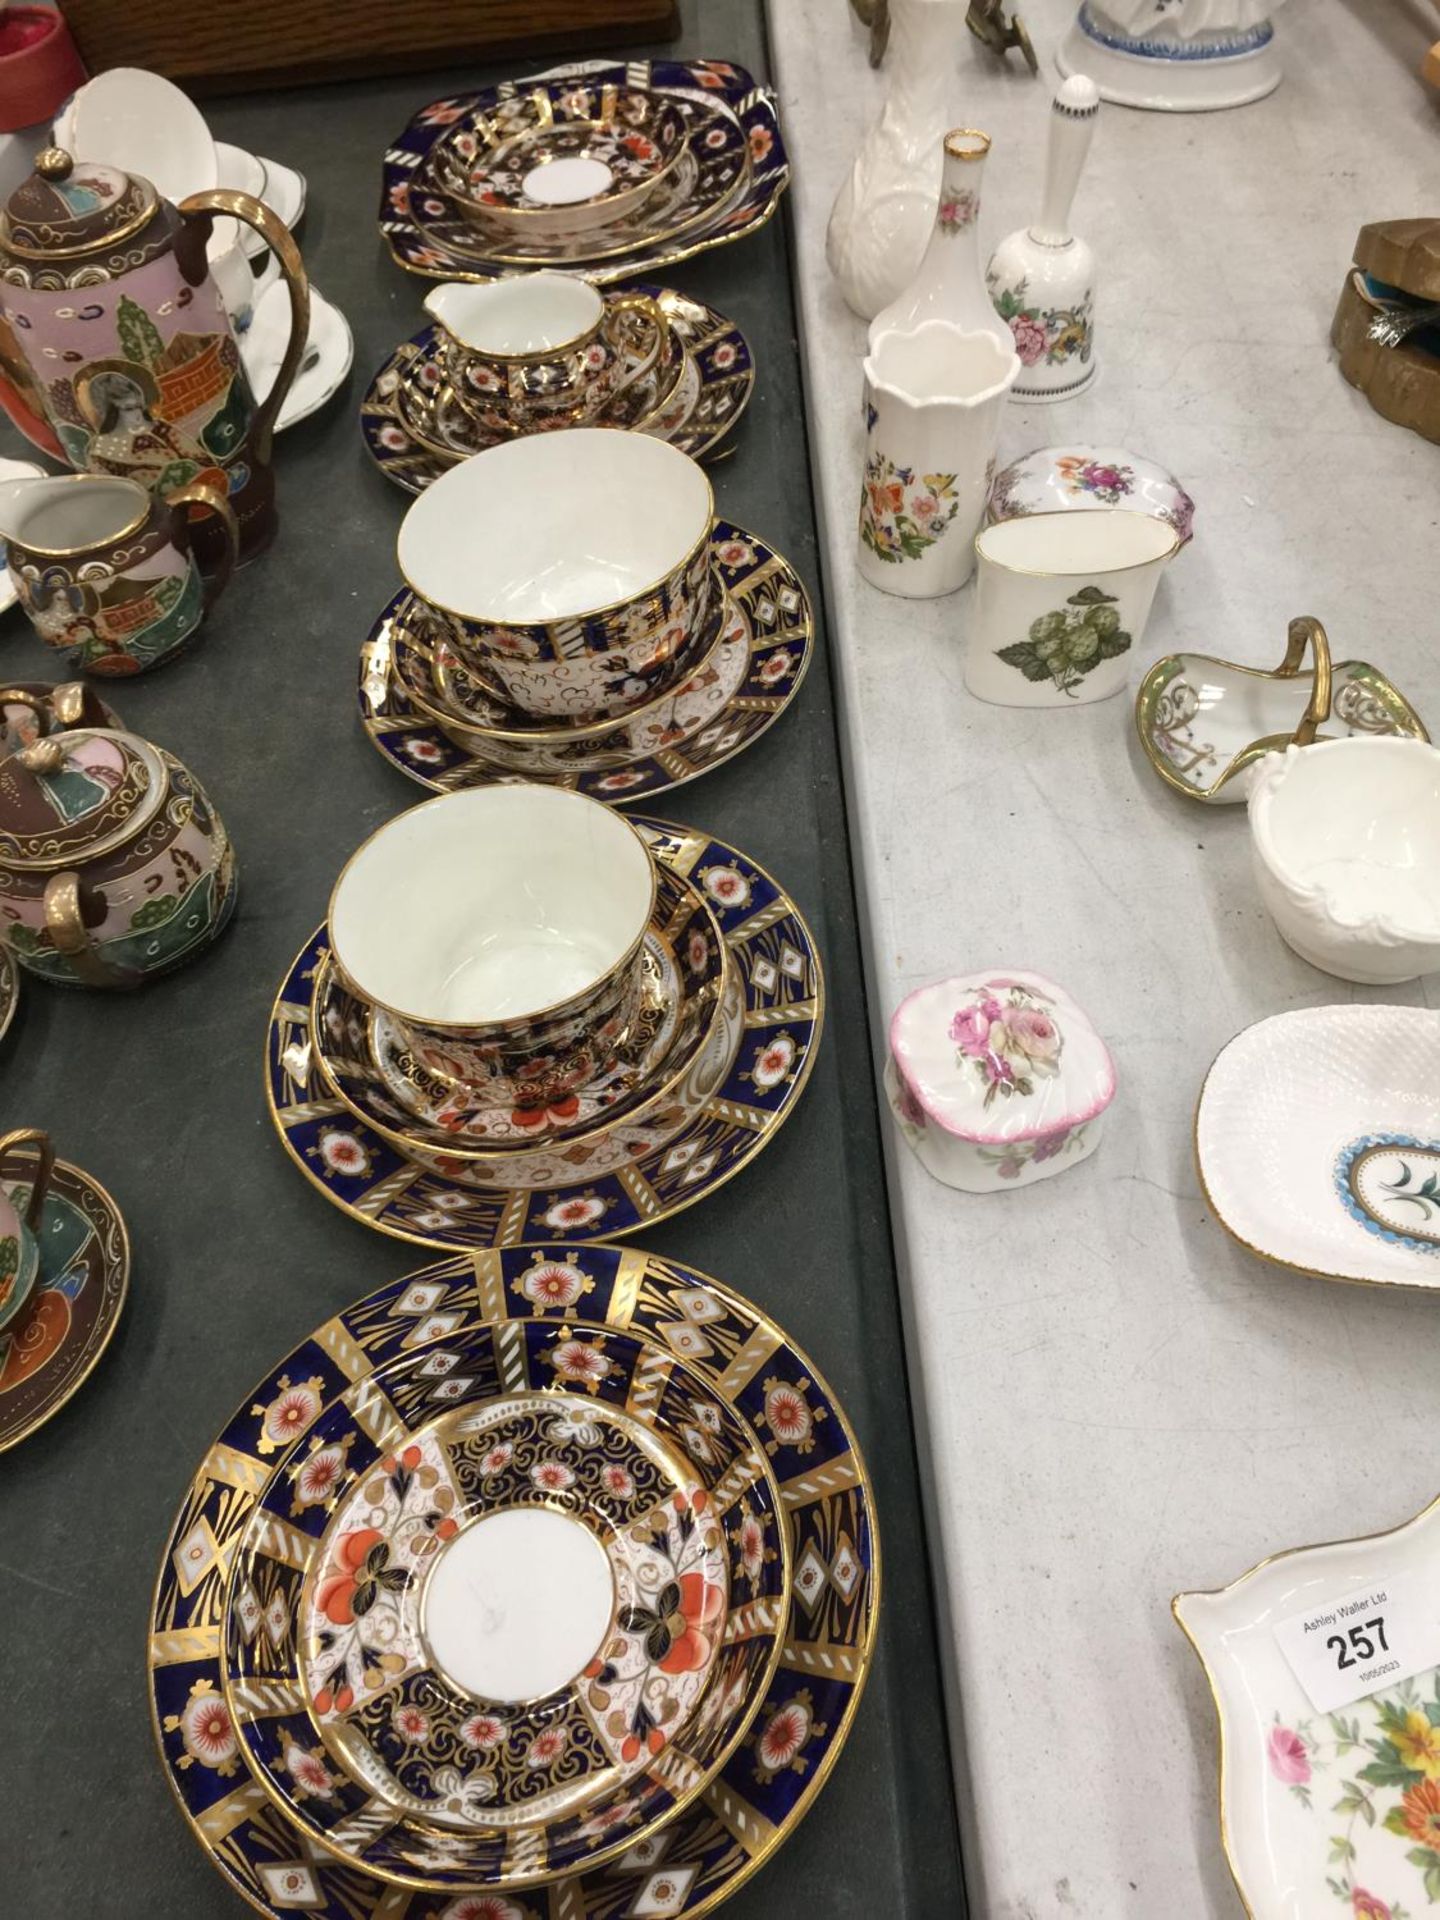 A QUANTITY OF VINTAGE POINTONS CHINA TO INCLUDE A CAKE PLATE, PLATES, SAUCERS, A CREAM JUG AND SUGAR